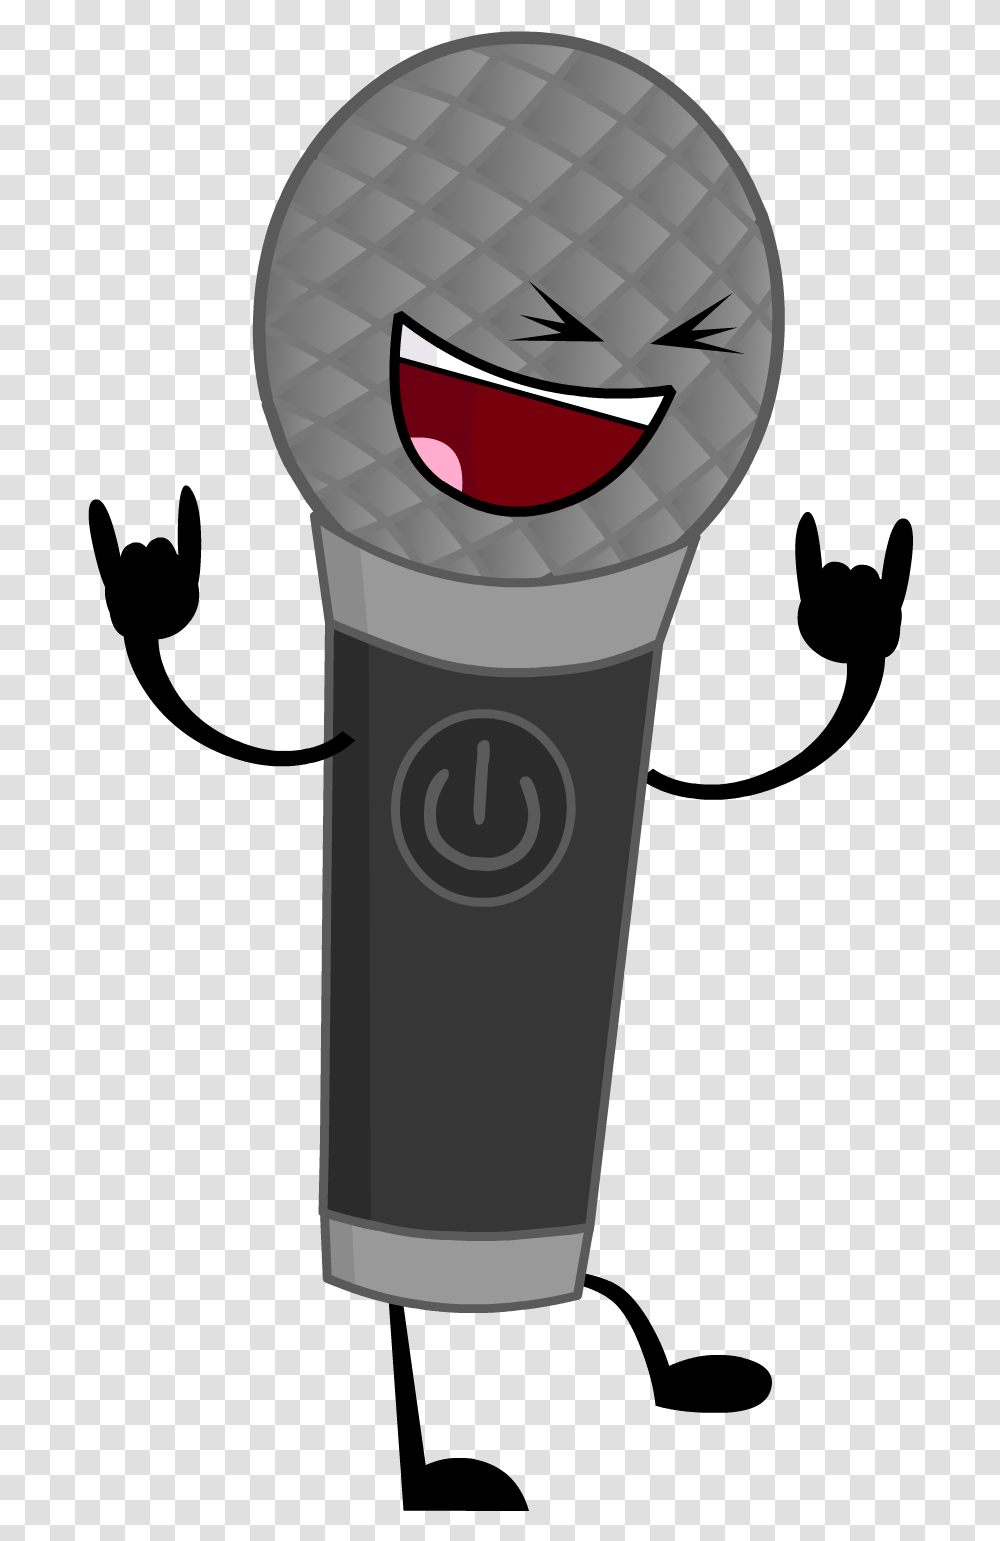 Inanimate Insanity 2 Prediction Microphone Tube Inanimate Insanity, Shaker, Bottle, Light, Appliance Transparent Png